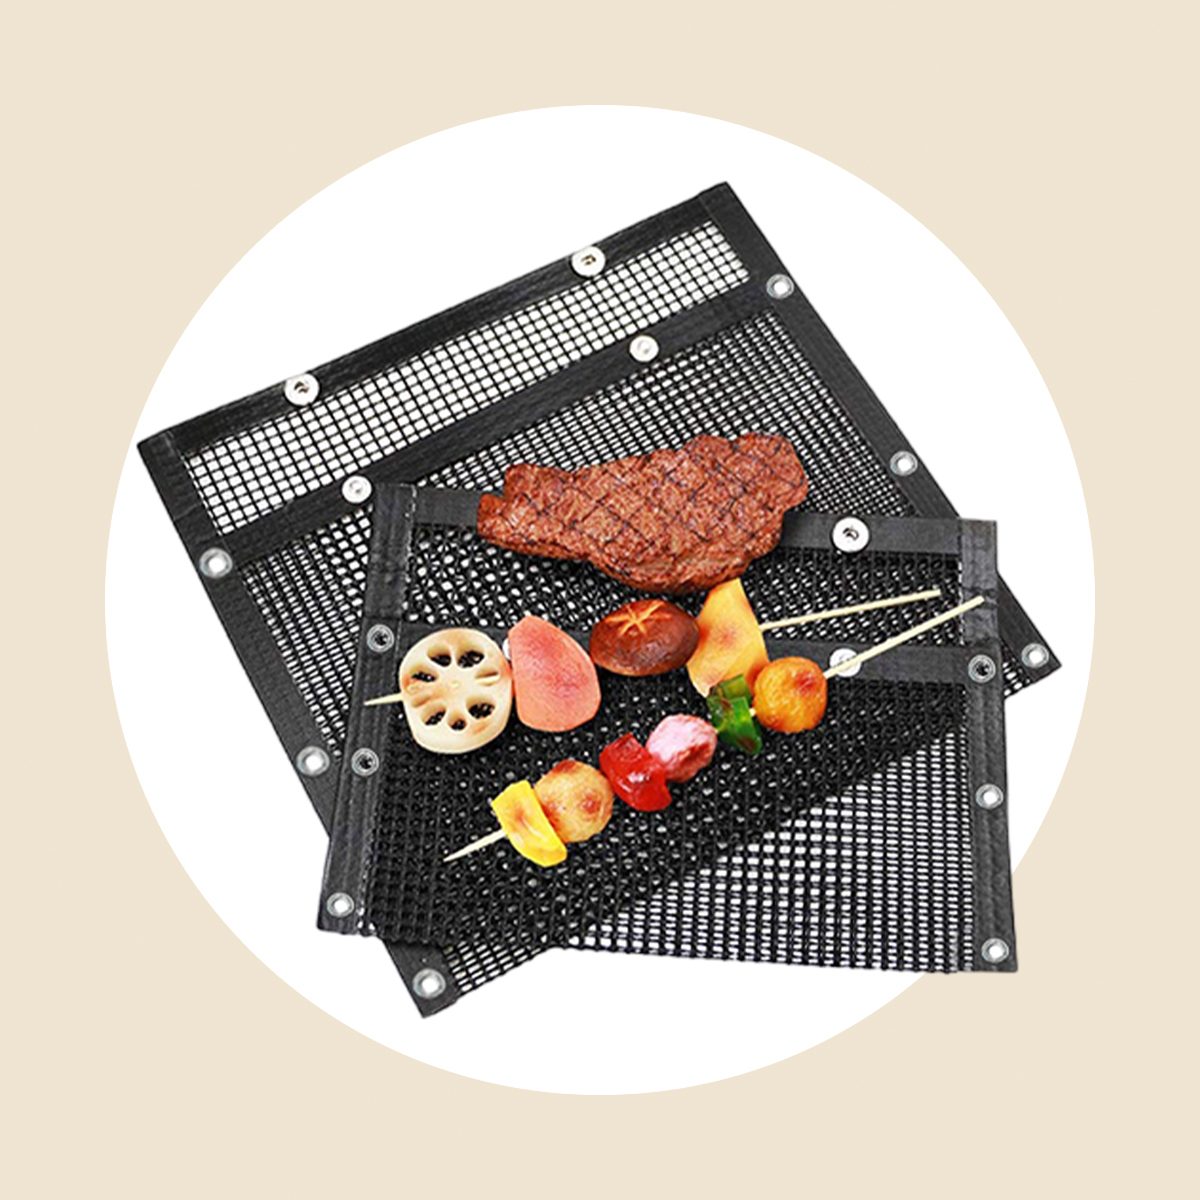 Grilling Accessories: Must-Haves for Barbecue Enthusiasts - Steak University